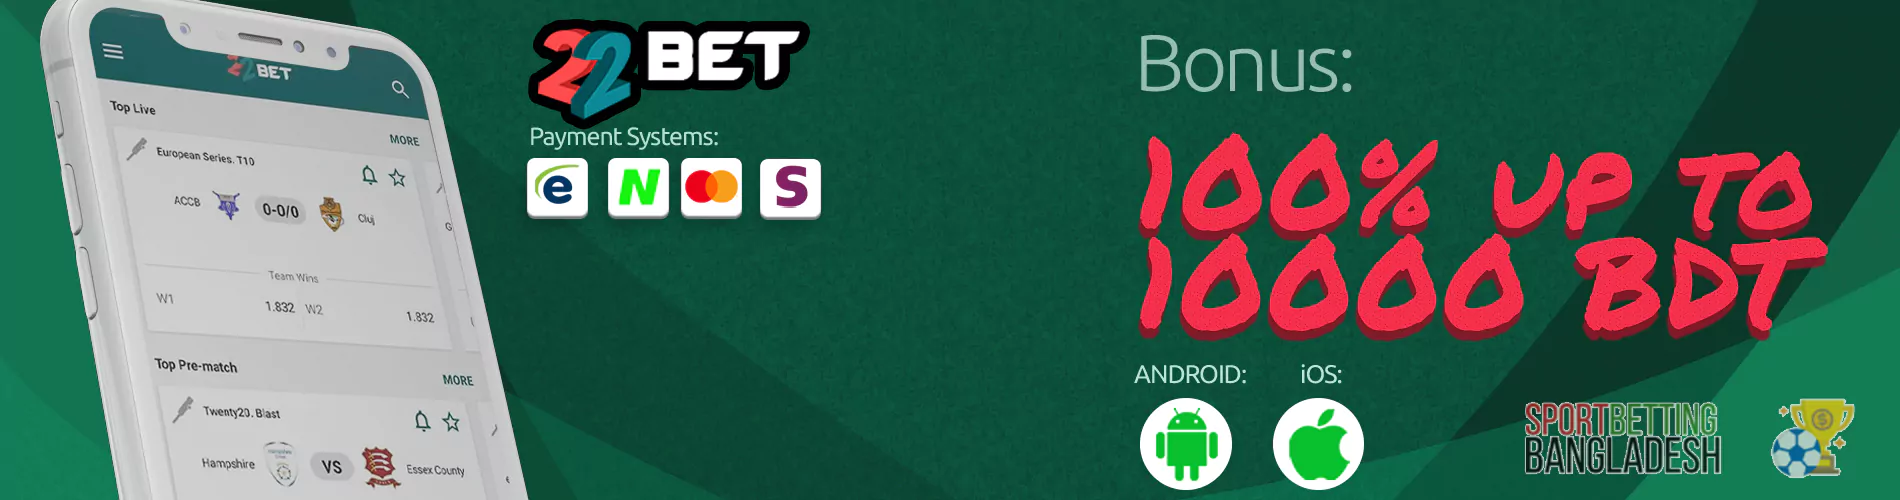 22bbet Bangladesh app: payment systems, available platforms, welcome bonus.